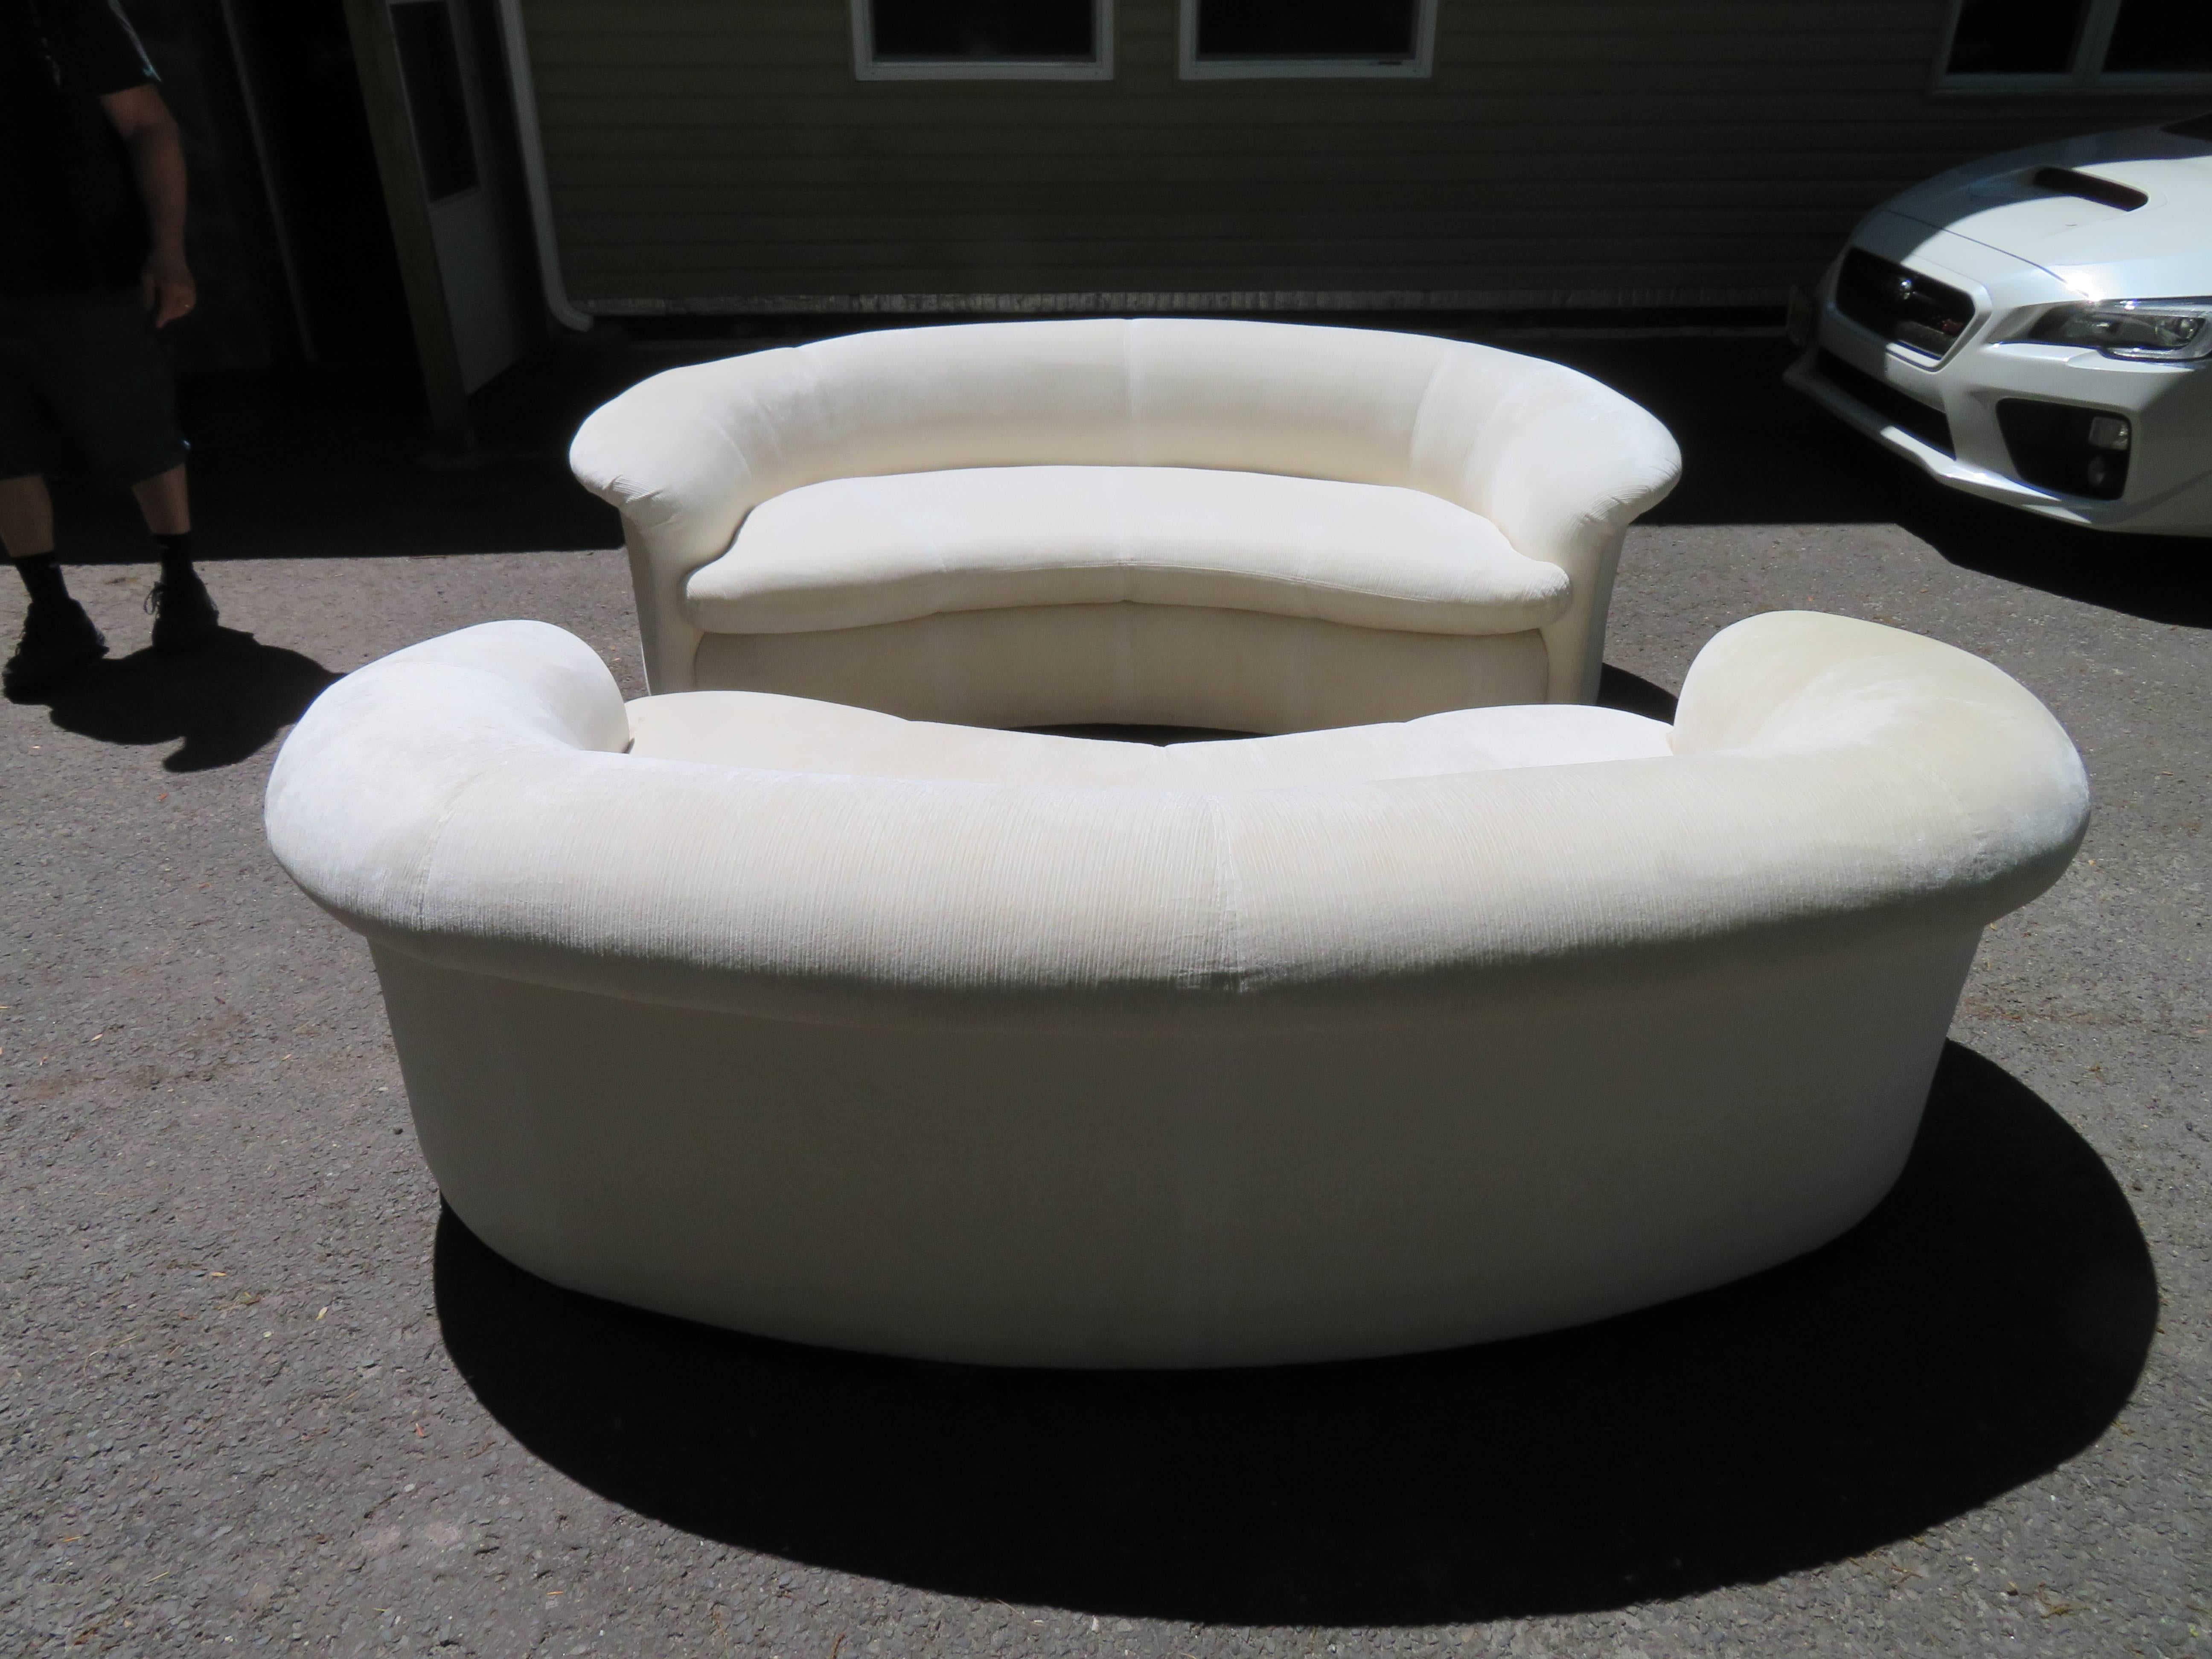 Lovely pair of curved kidney shaped sofas for Weiman-Vladimir Kagan style. This pair are the perfect size at 28